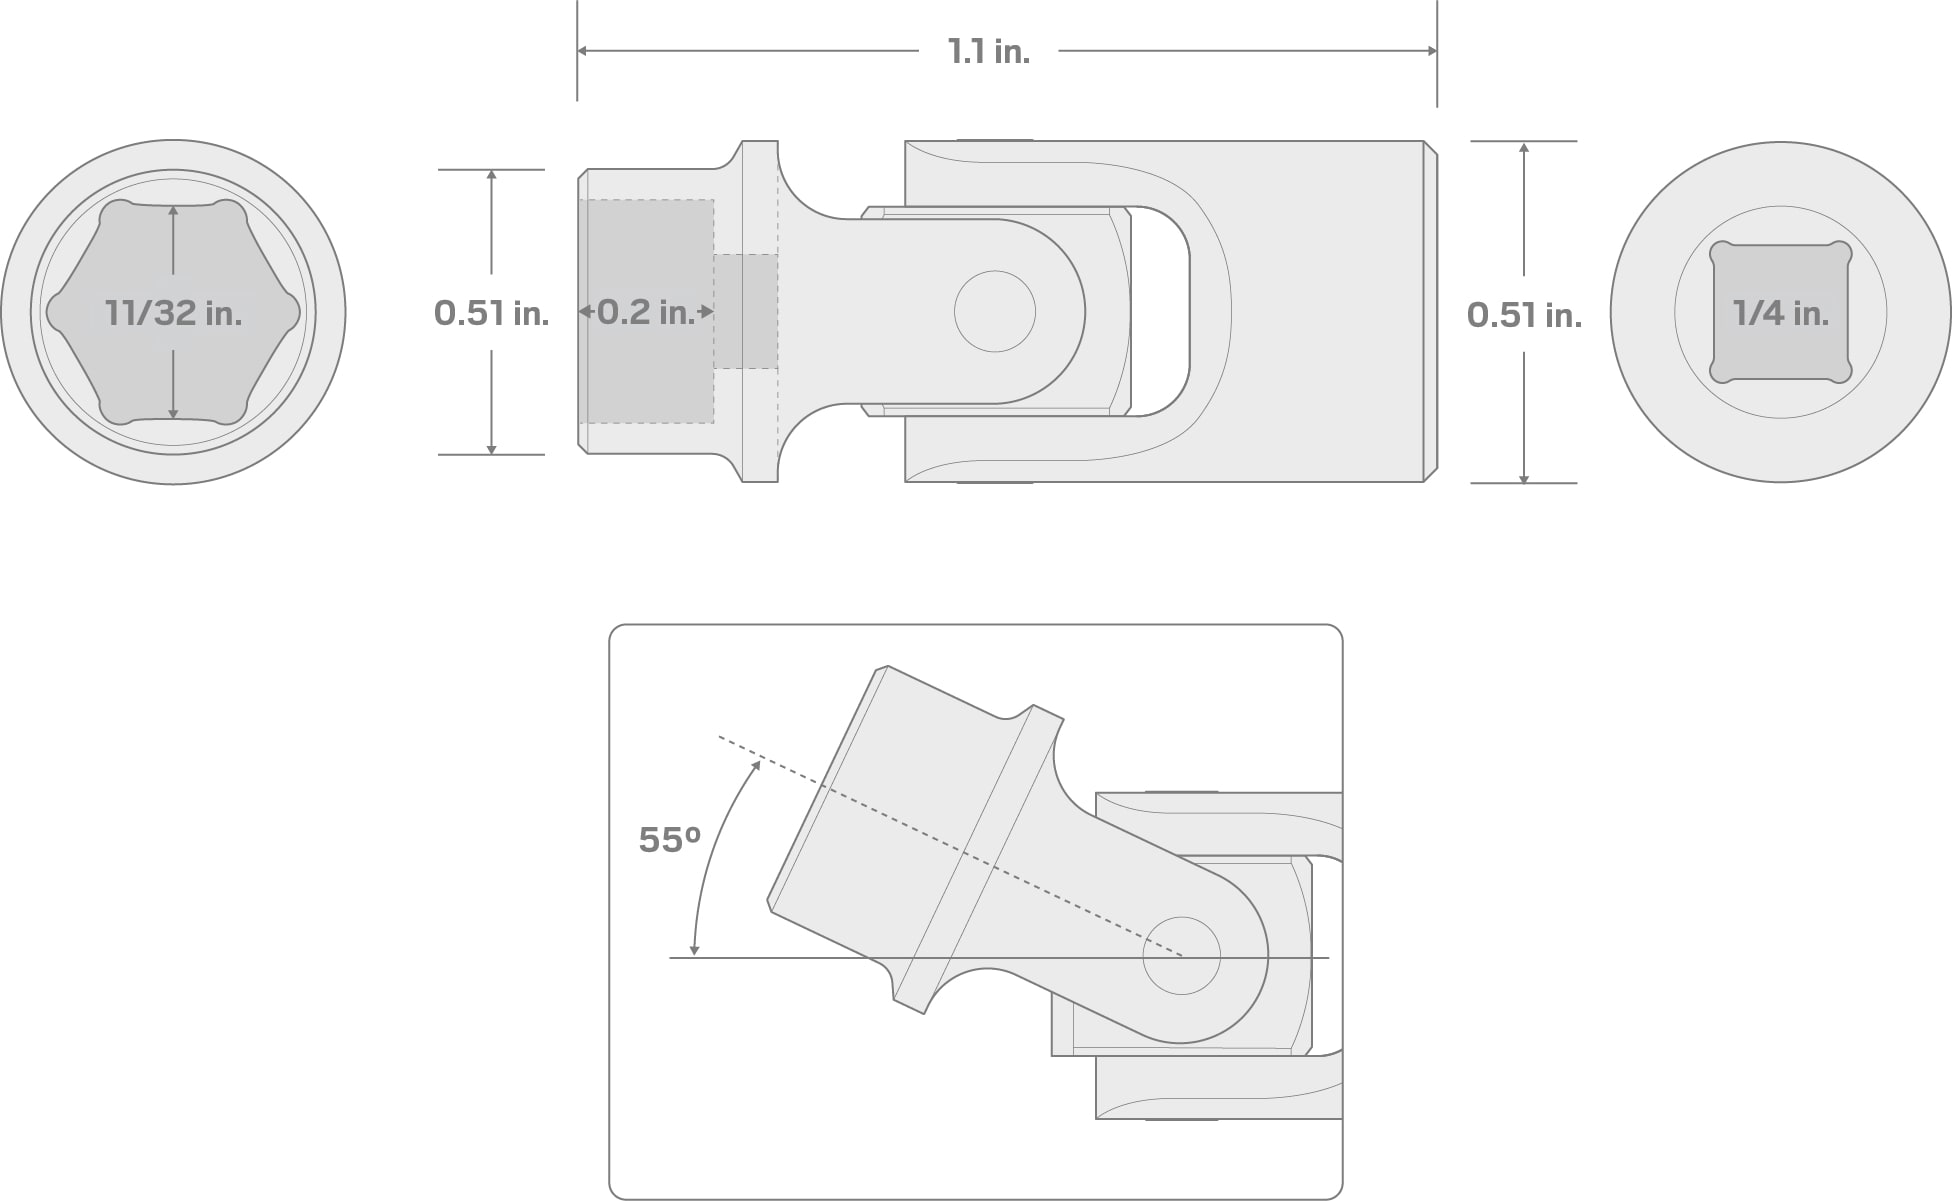 Specs for 1/4 Inch Drive x 11/32 Inch Universal Joint Socket